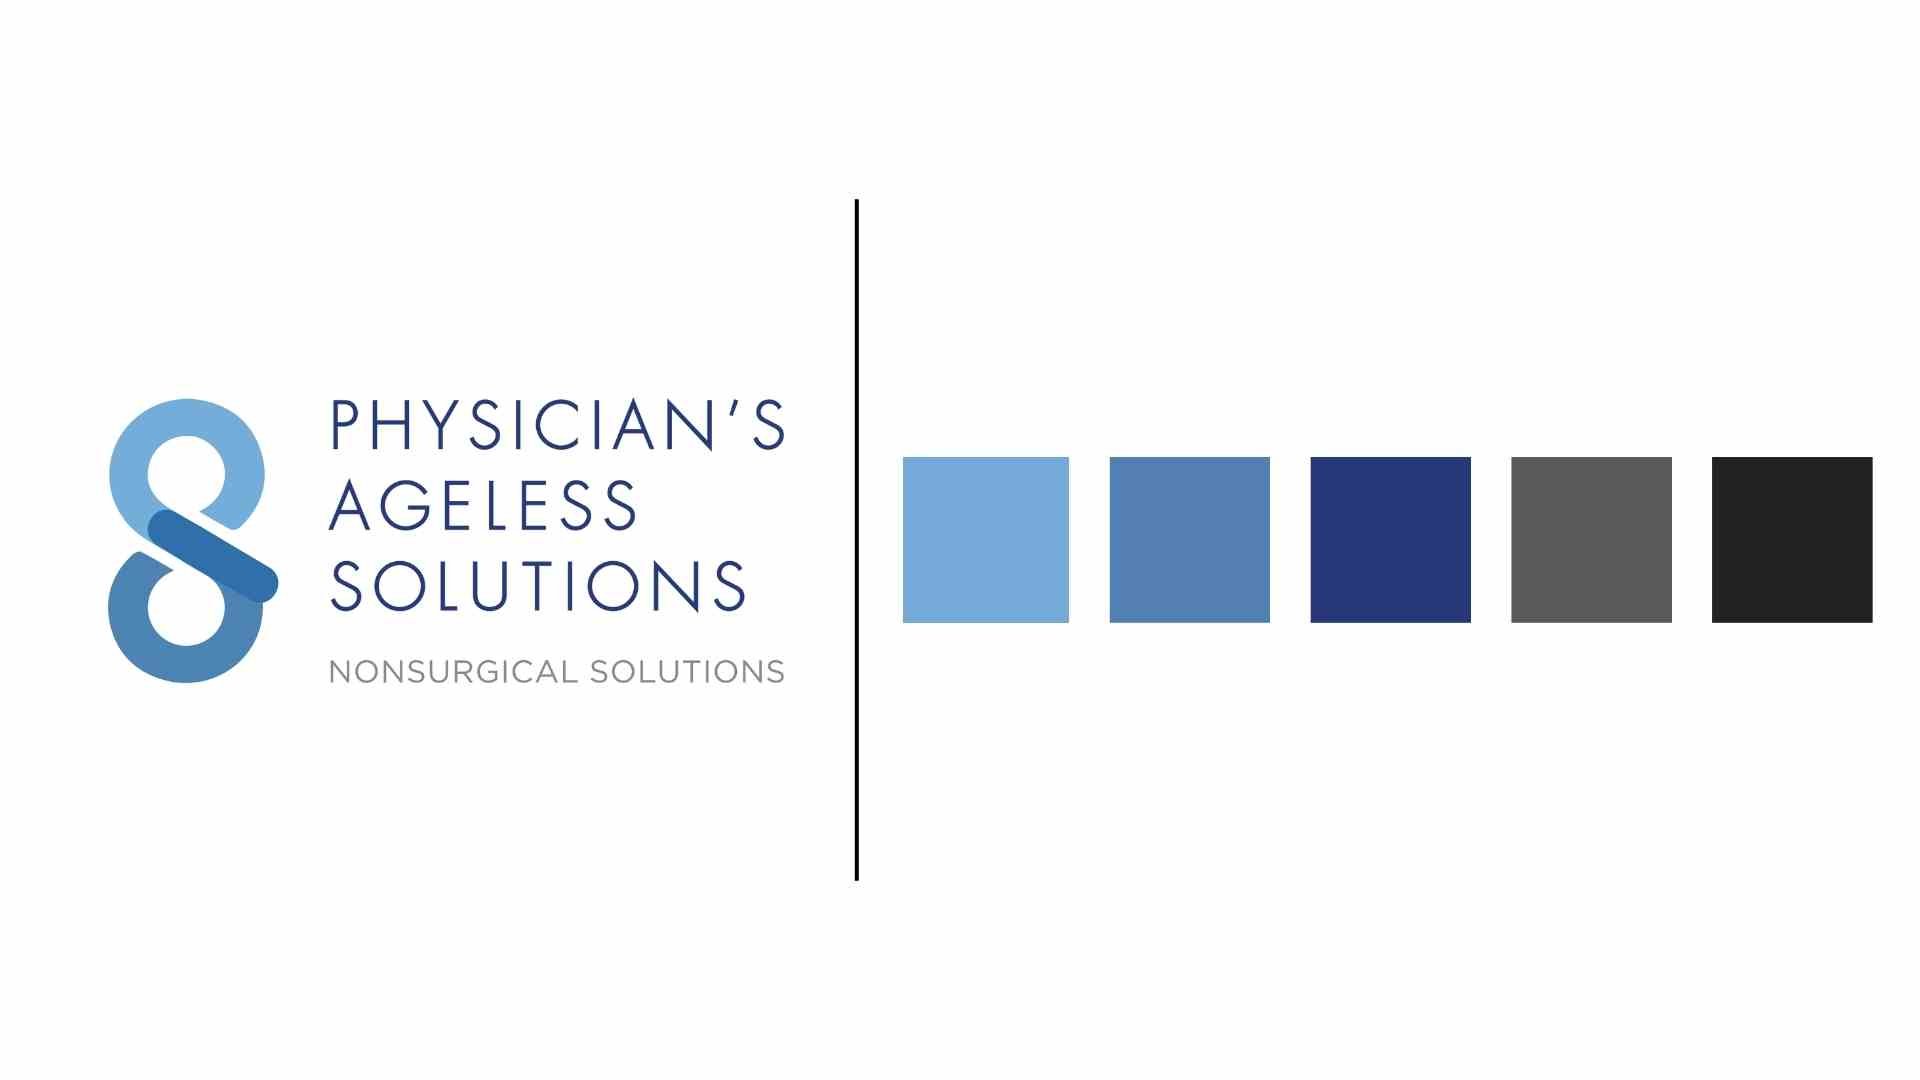 Physician's Ageless Solutions Brand Board